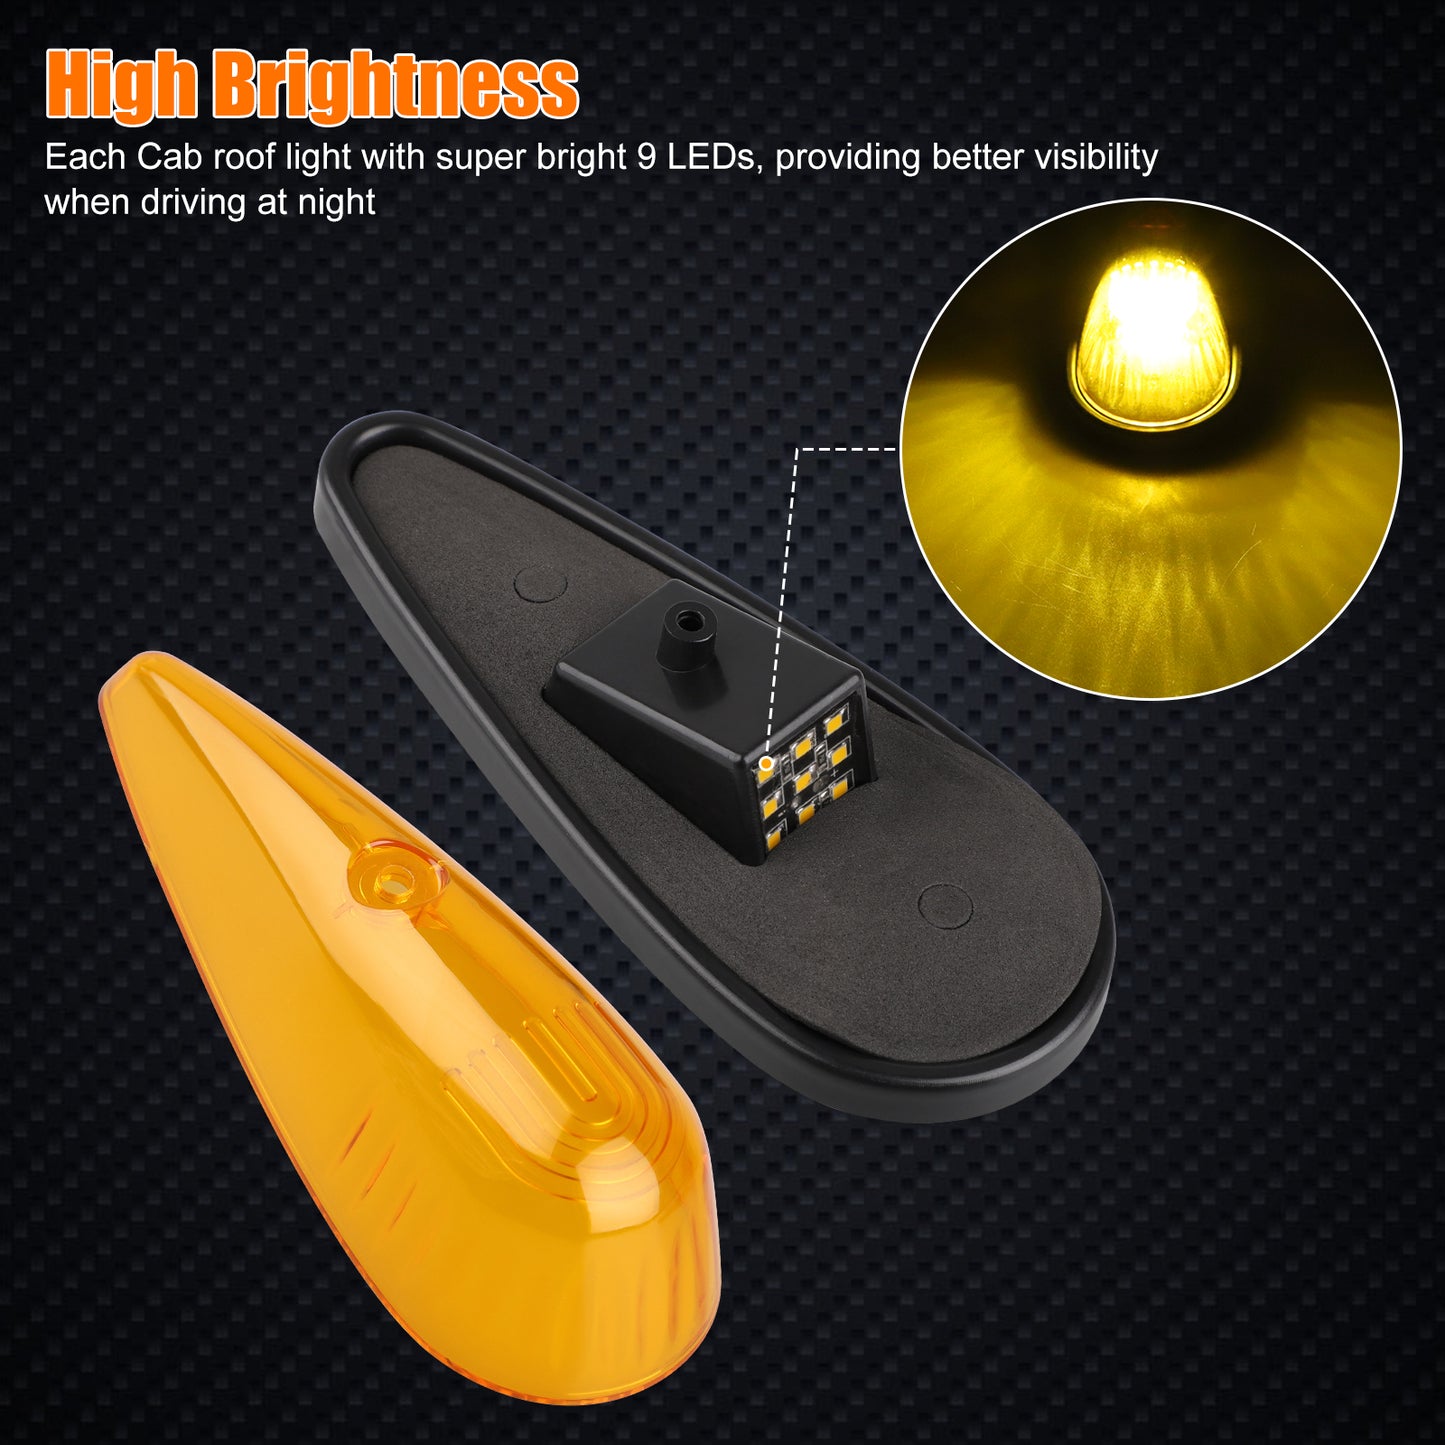 5PCS Amber 9 LED Teardrop Cab Marker Lights Top Clearance Roof Running Light - Easy Install, High Brightness, Long-lasting, IP68 Waterproof ,12V Compatibility, for Trucks, Trailers, RVs